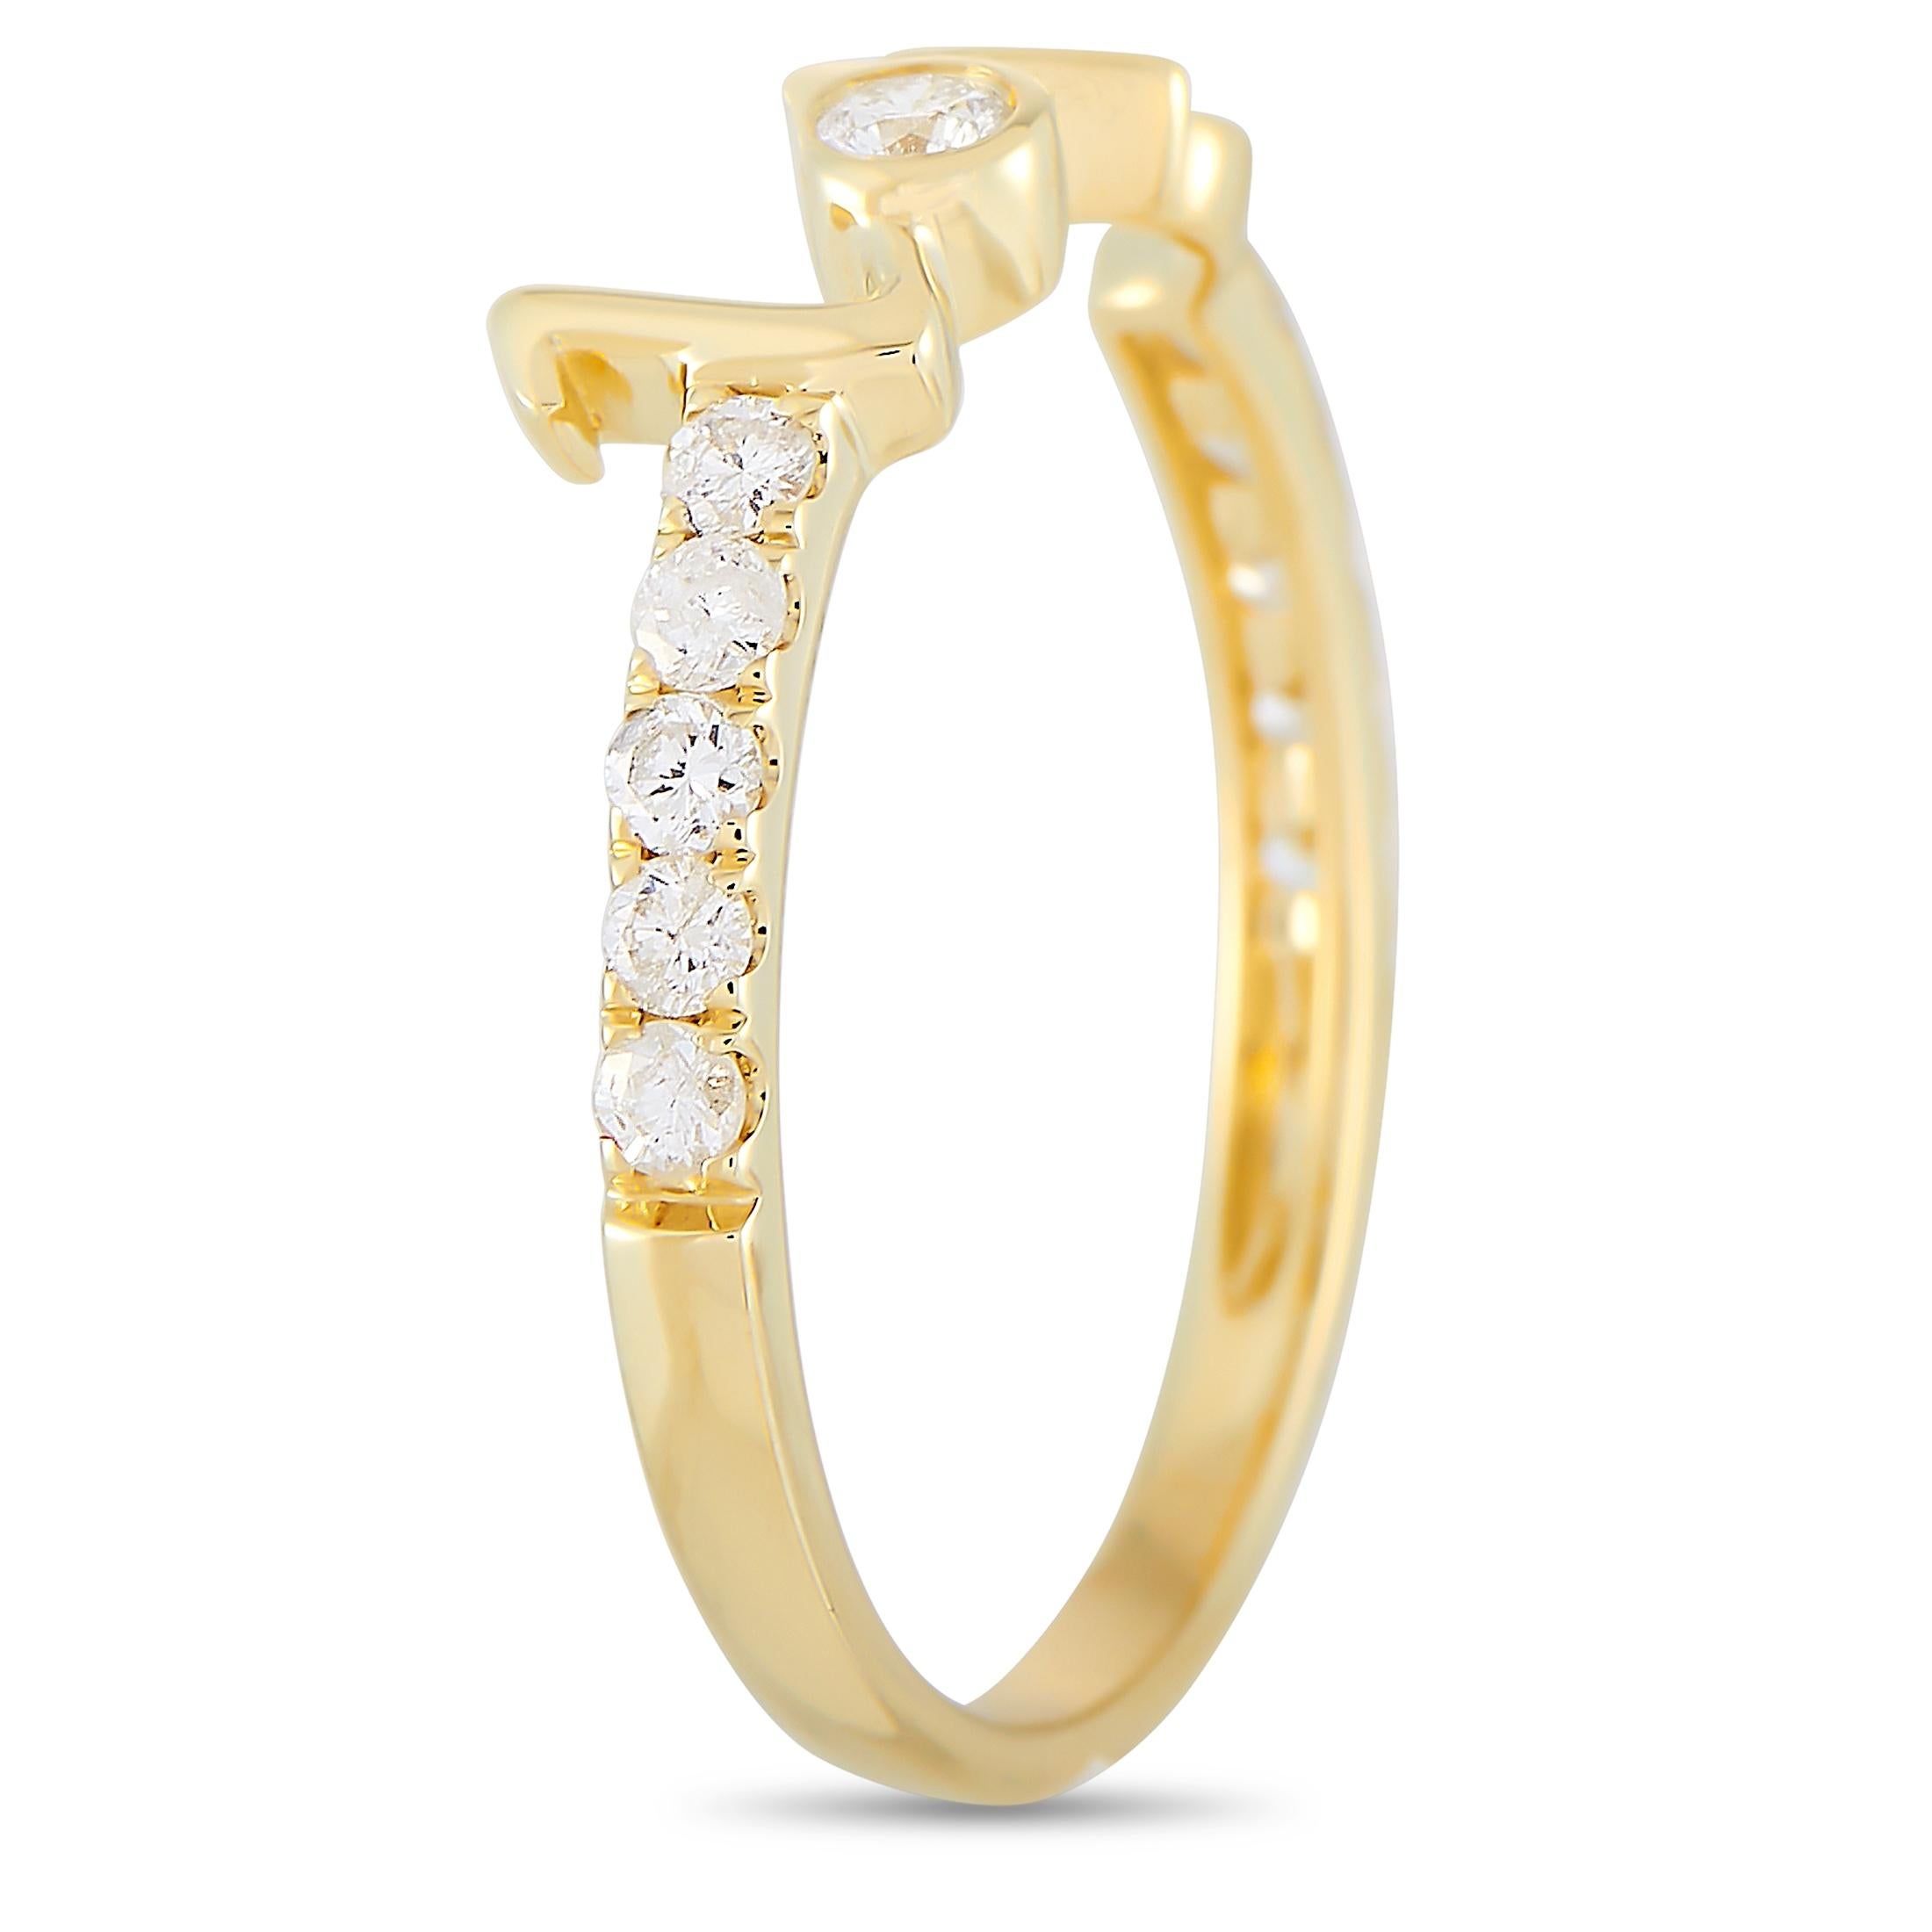 This LB Exclusive love ring is made of 14K yellow gold and embellished with diamonds that amount to 0.25 carats. The ring weighs 1.6 grams and boasts band thickness of 3 mm and top height of 4 mm, while top dimensions measure 5 by 15 mm.
 
 Offered